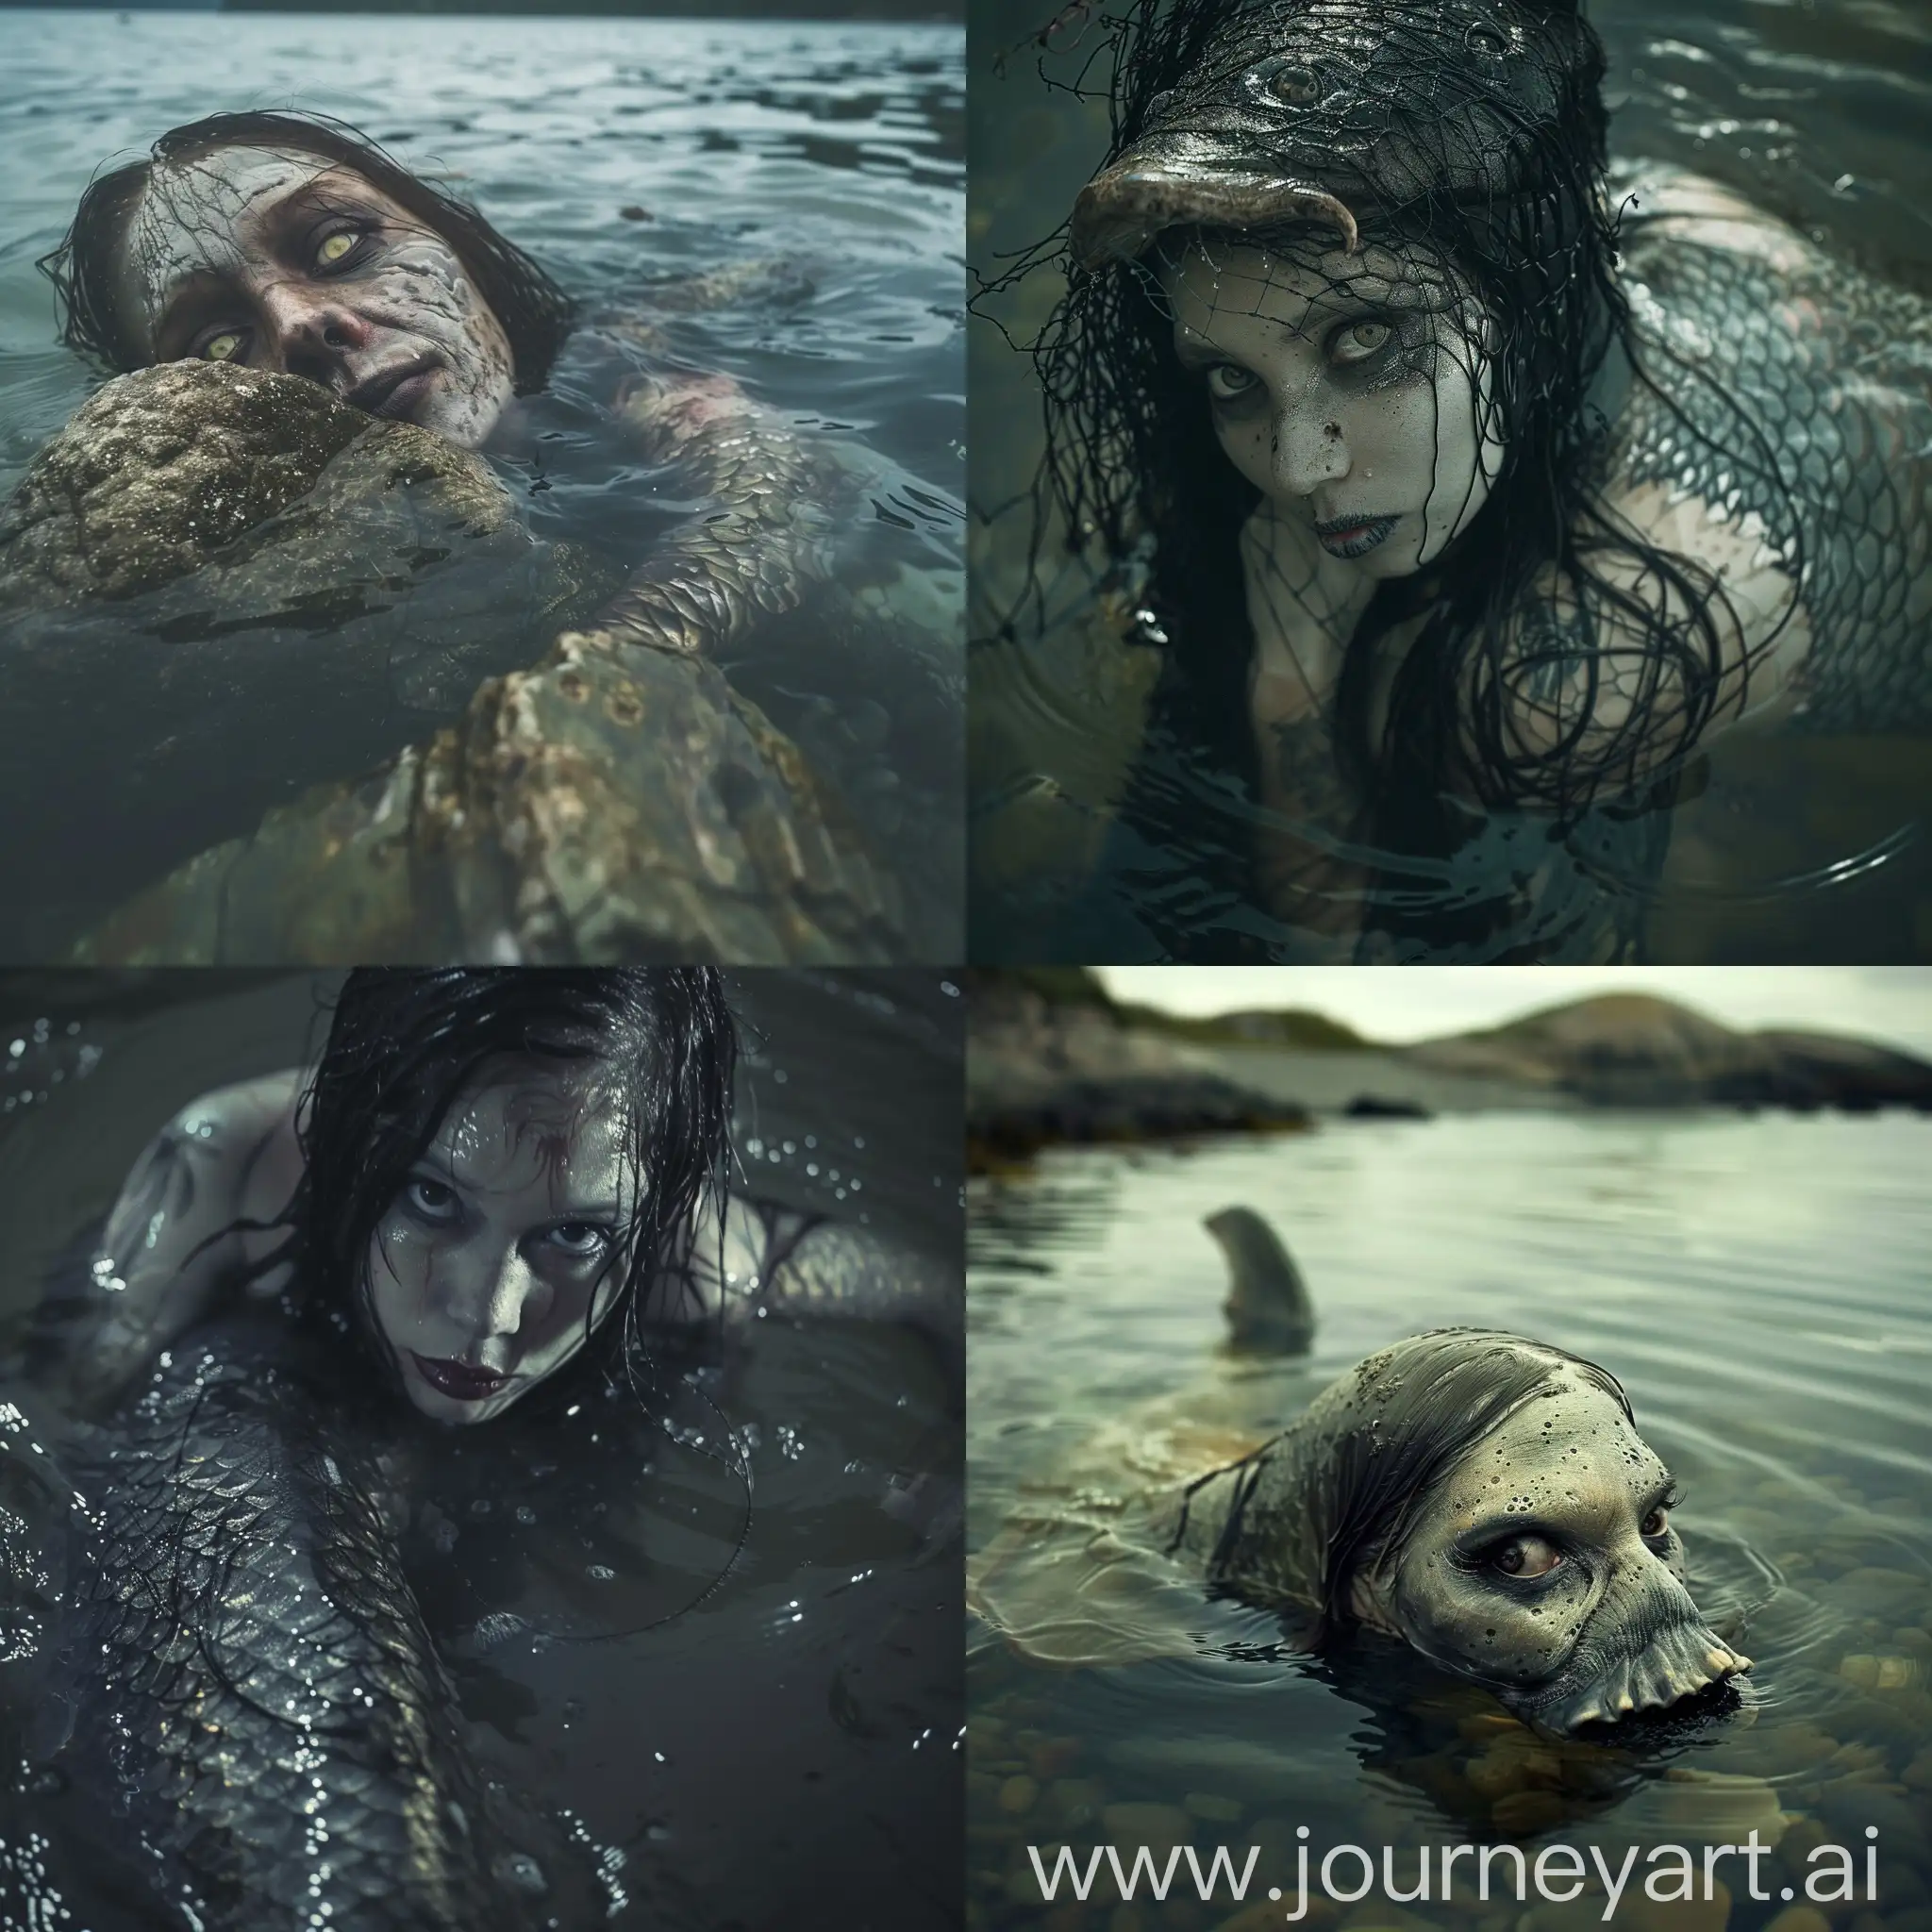  --sref https://encrypted-tbn0.gstatic.com/images?q=tbn:ANd9GcS3i8i1FLduCEsOWVSrUFJVwnz6hWL0eSXOOw&usqp=CAU A creepy qallupilluit mermaid woman with her Half body out of the water, looking at the camera, --style raw --ar 4:7 --weird 10